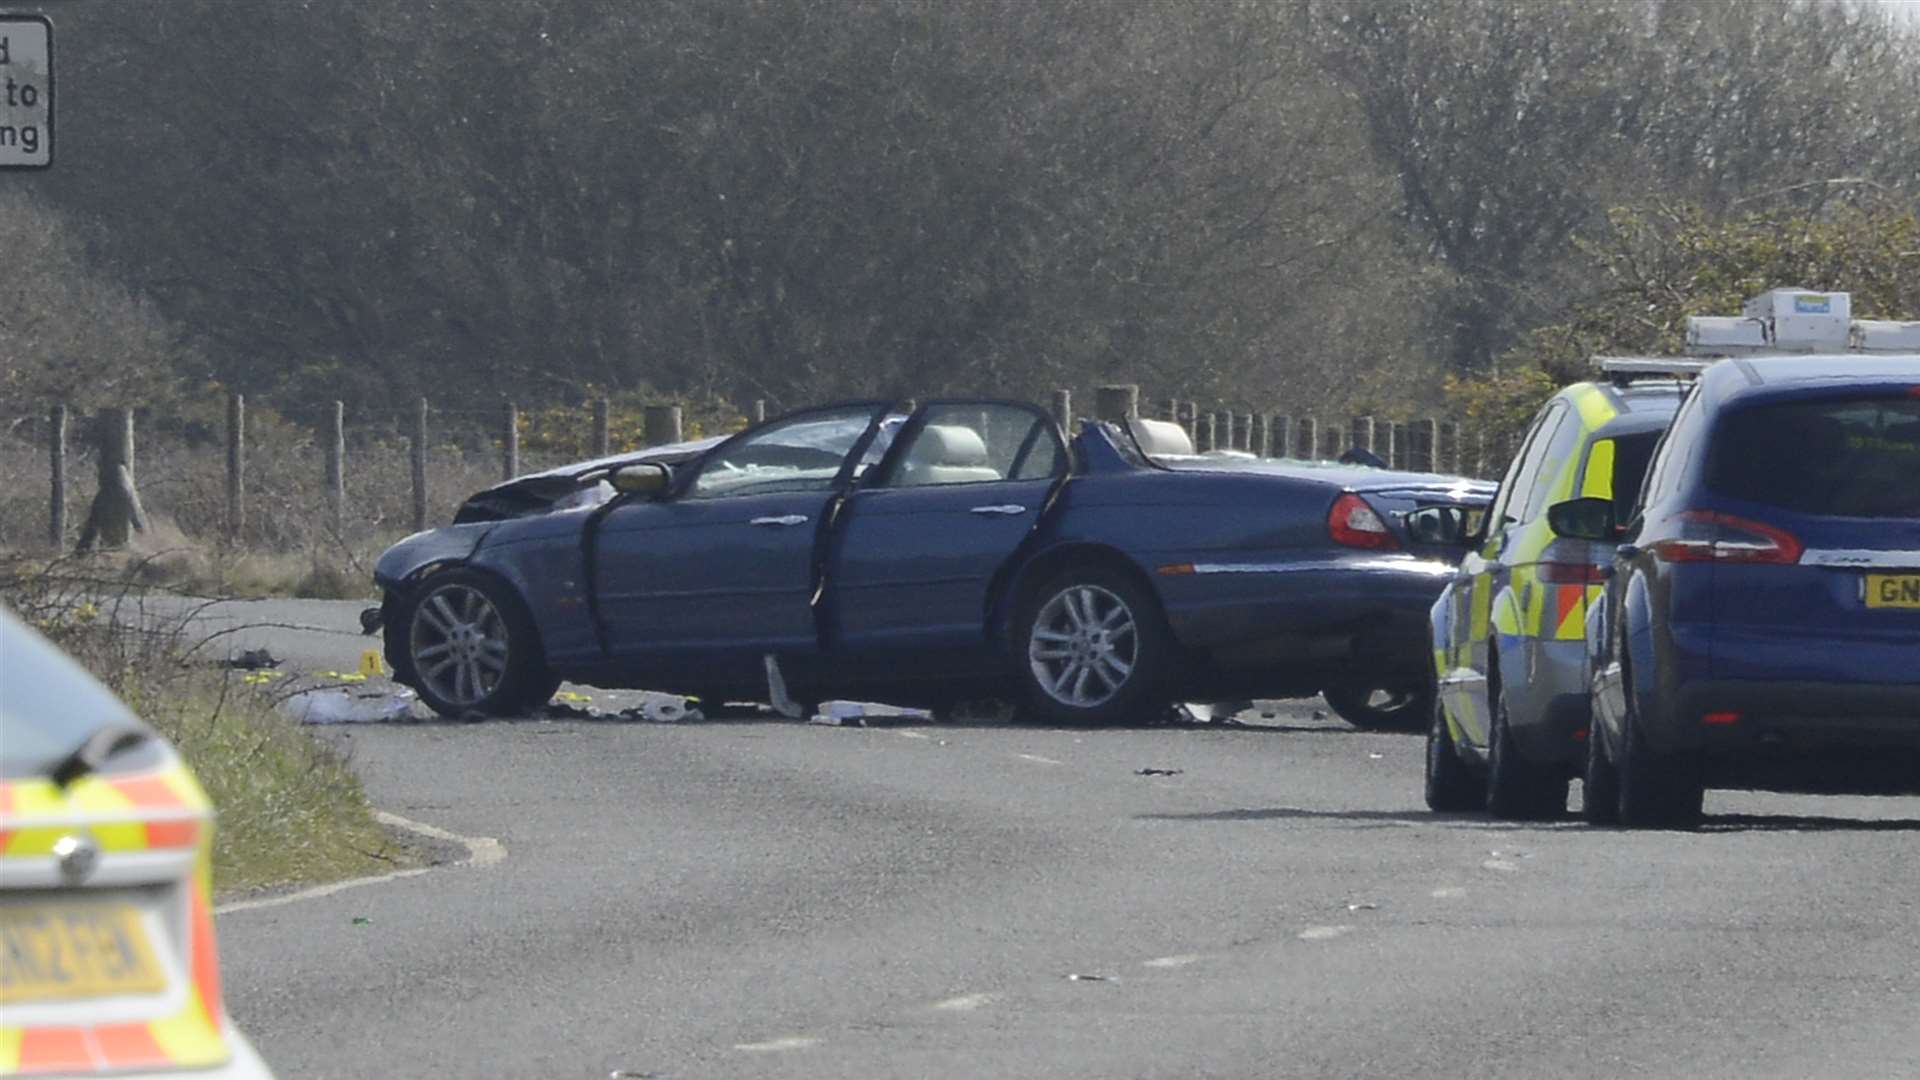 The Jaguar involved in the crash. Picture: Paul Amos